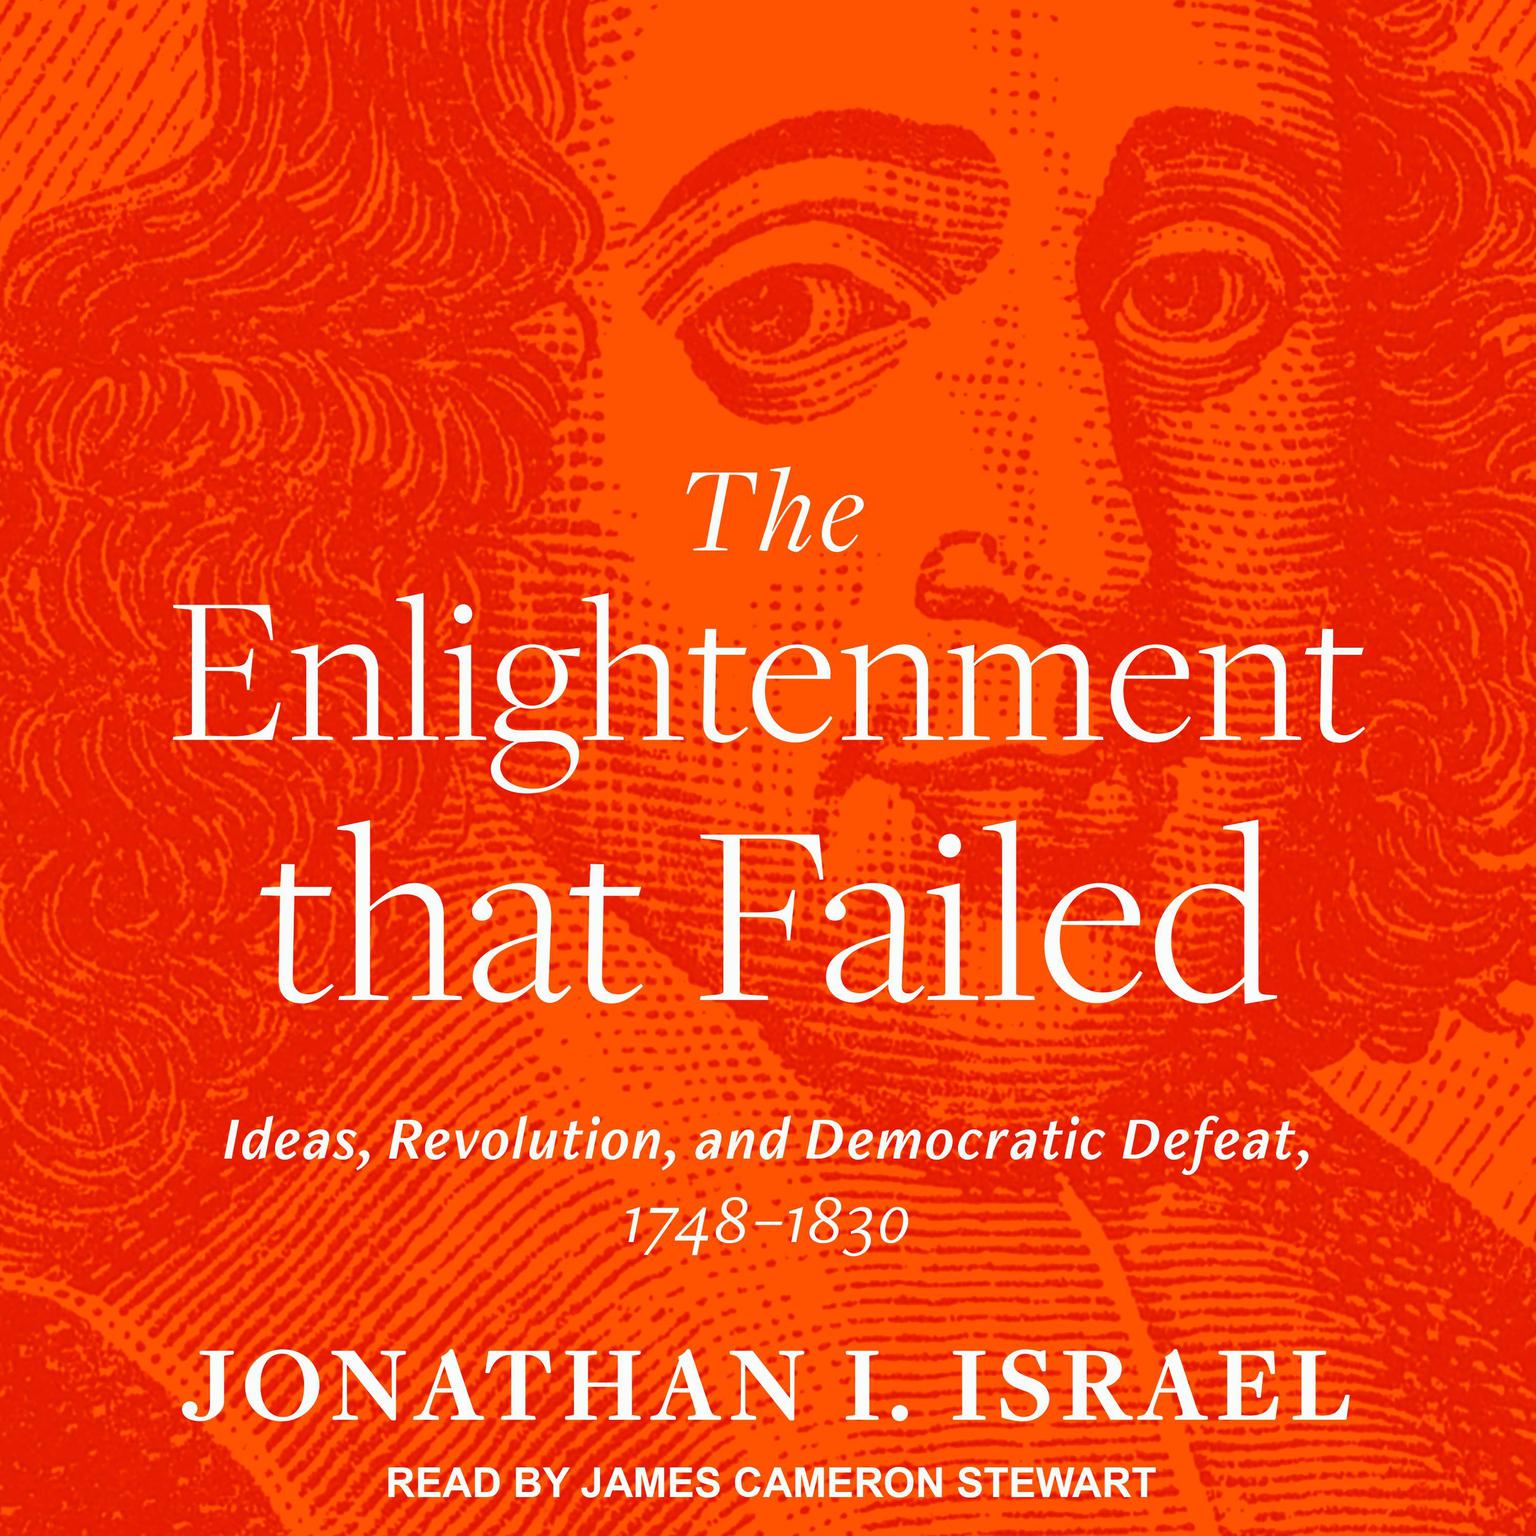 The Enlightenment that Failed: Ideas, Revolution, and Democratic Defeat, 1748-1830 Audiobook, by Jonathan I. Israel